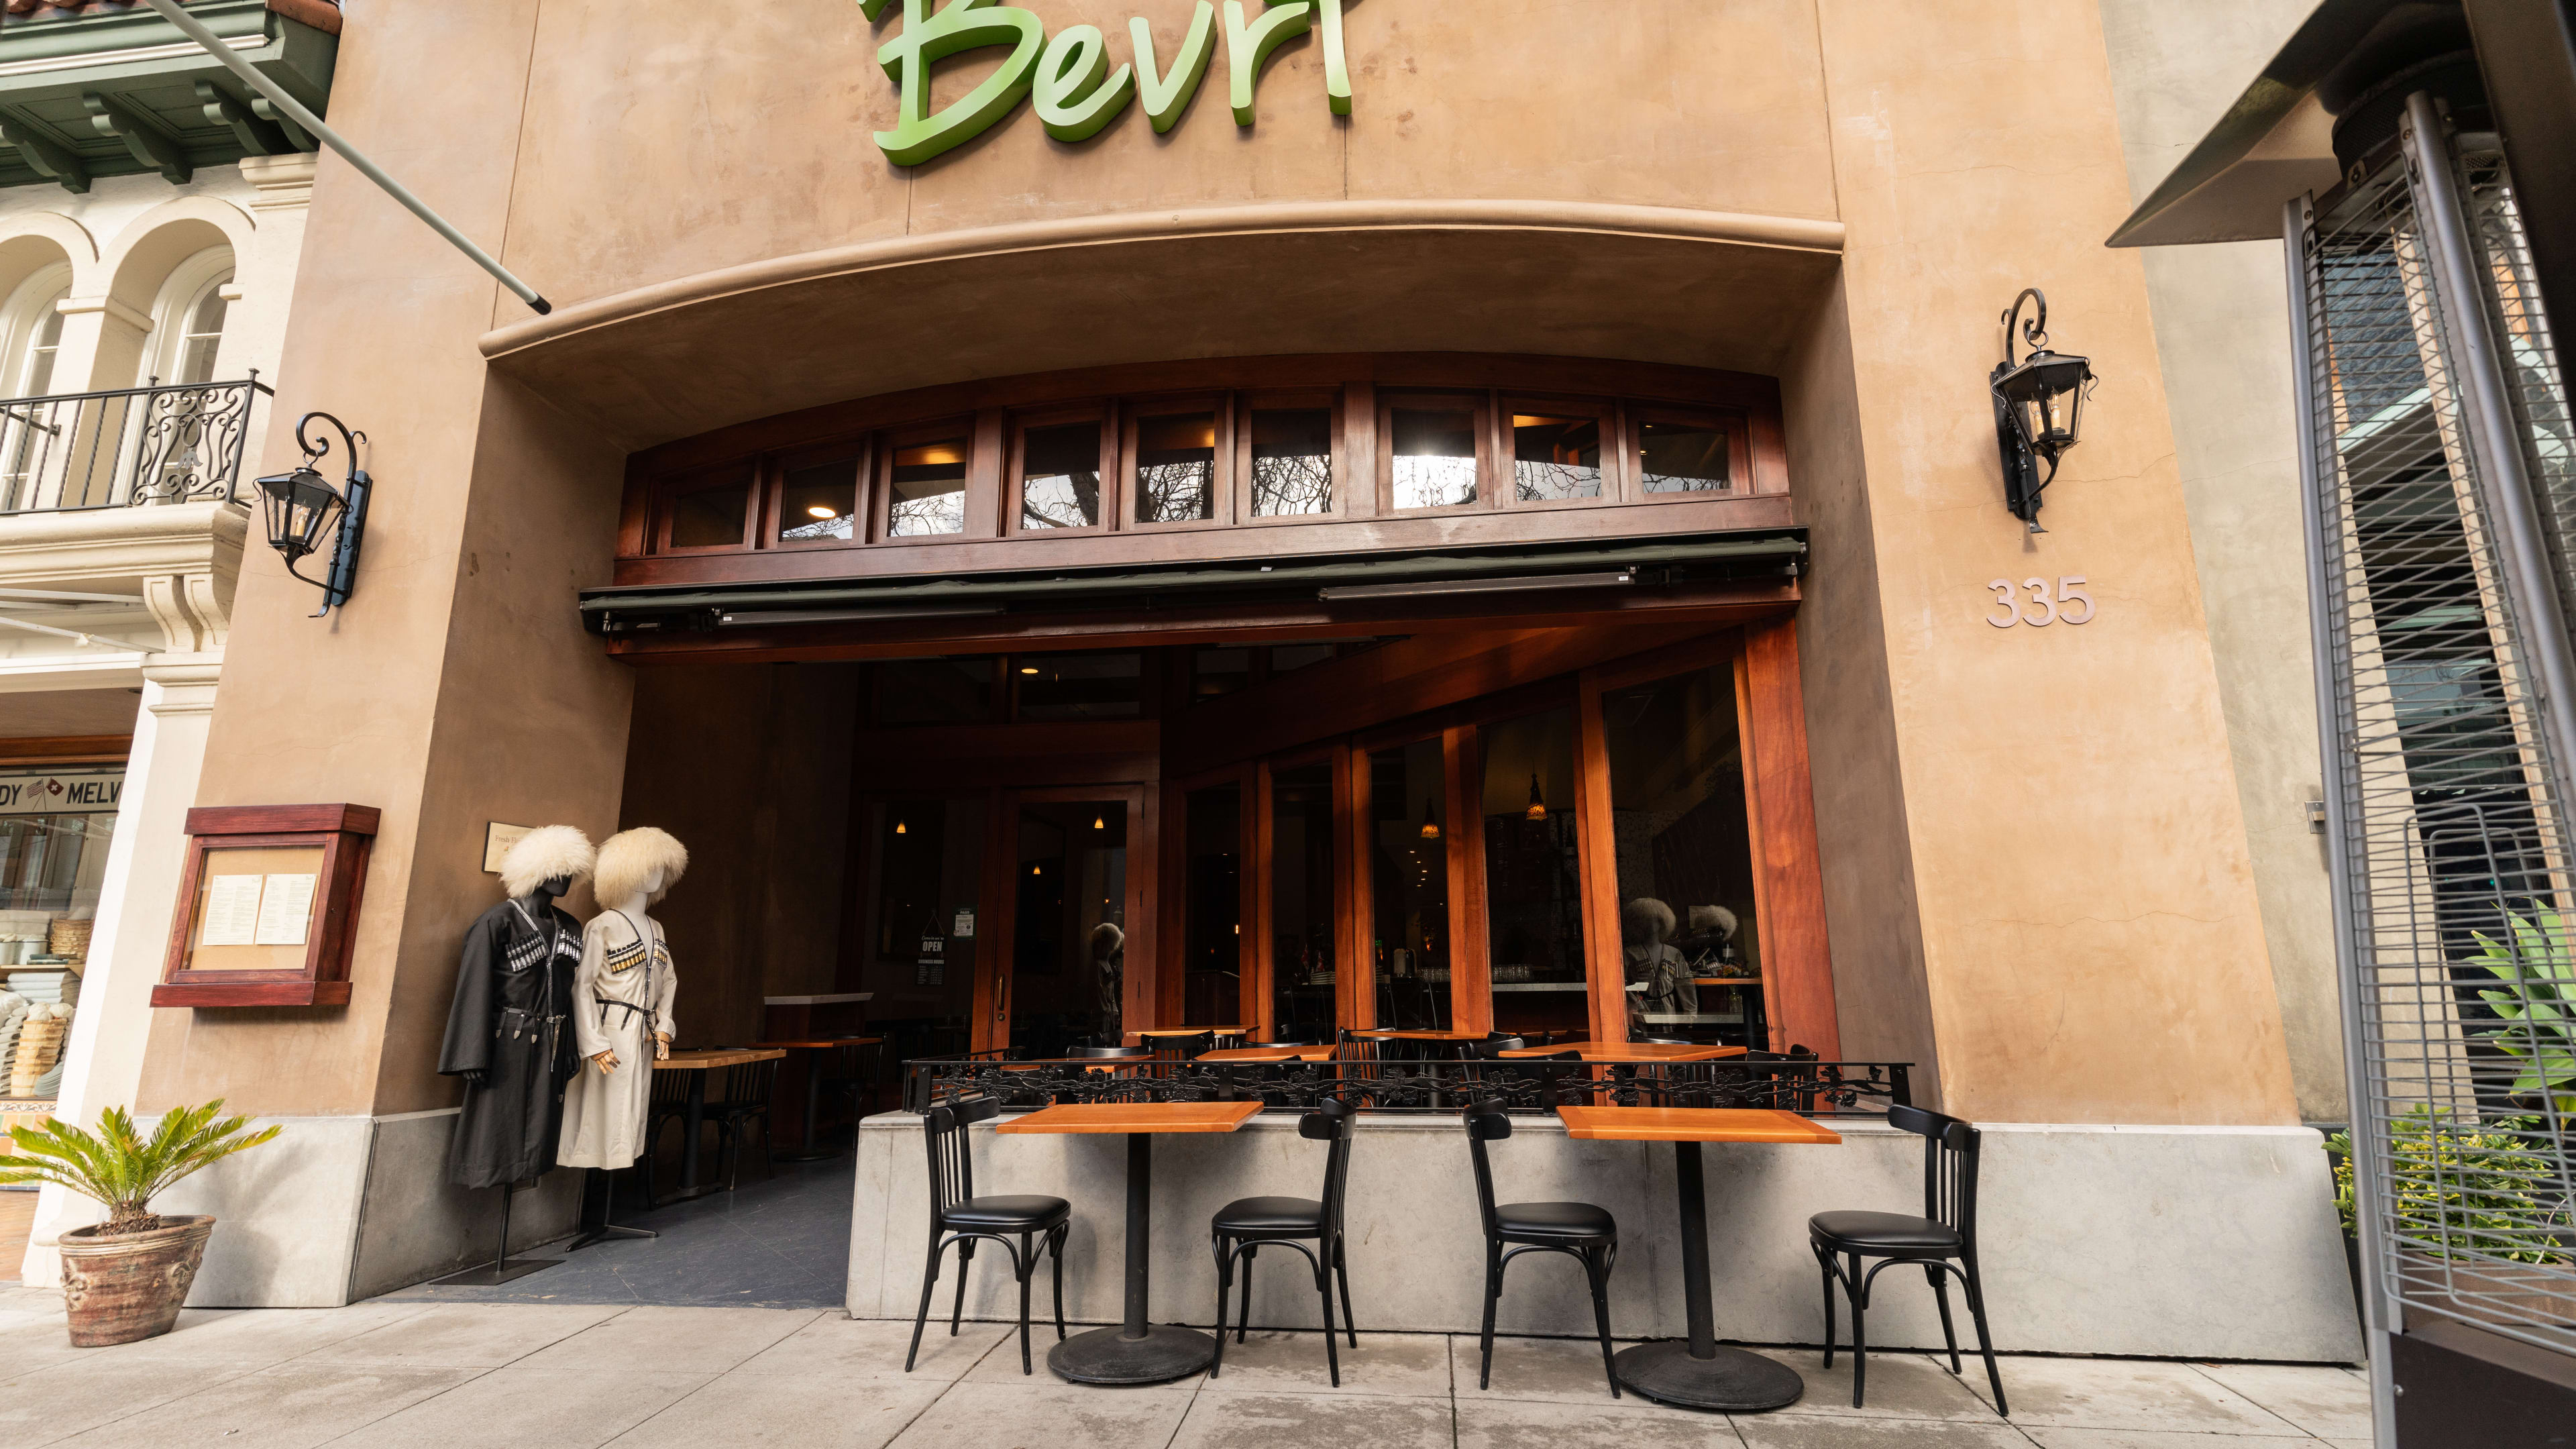 The exterior and outdoor tables at Bevri